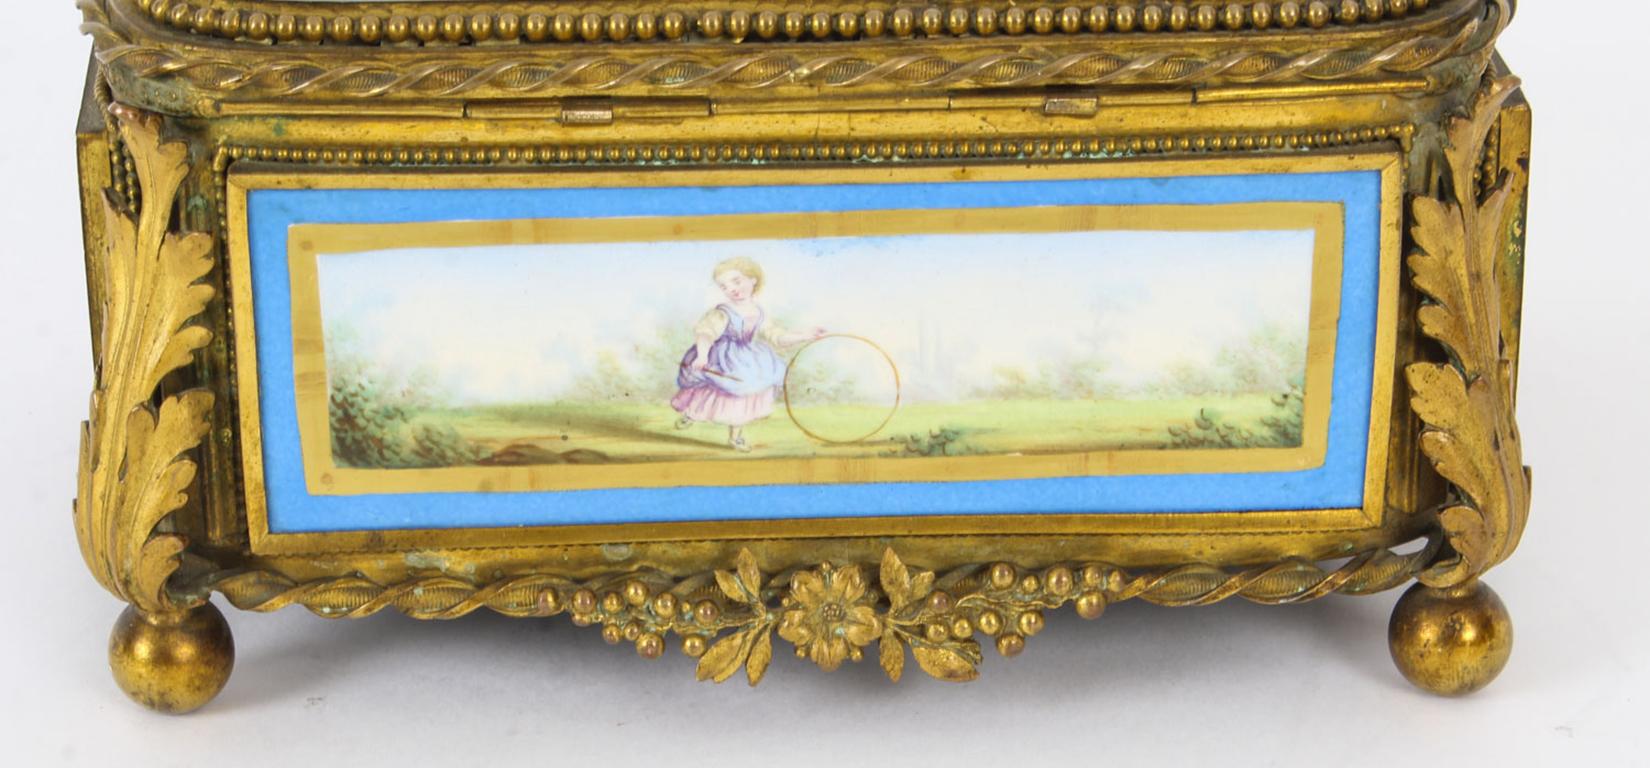 Antique French Sevres Porcelain and Ormolu Jewellery Casket, 19th Century 1